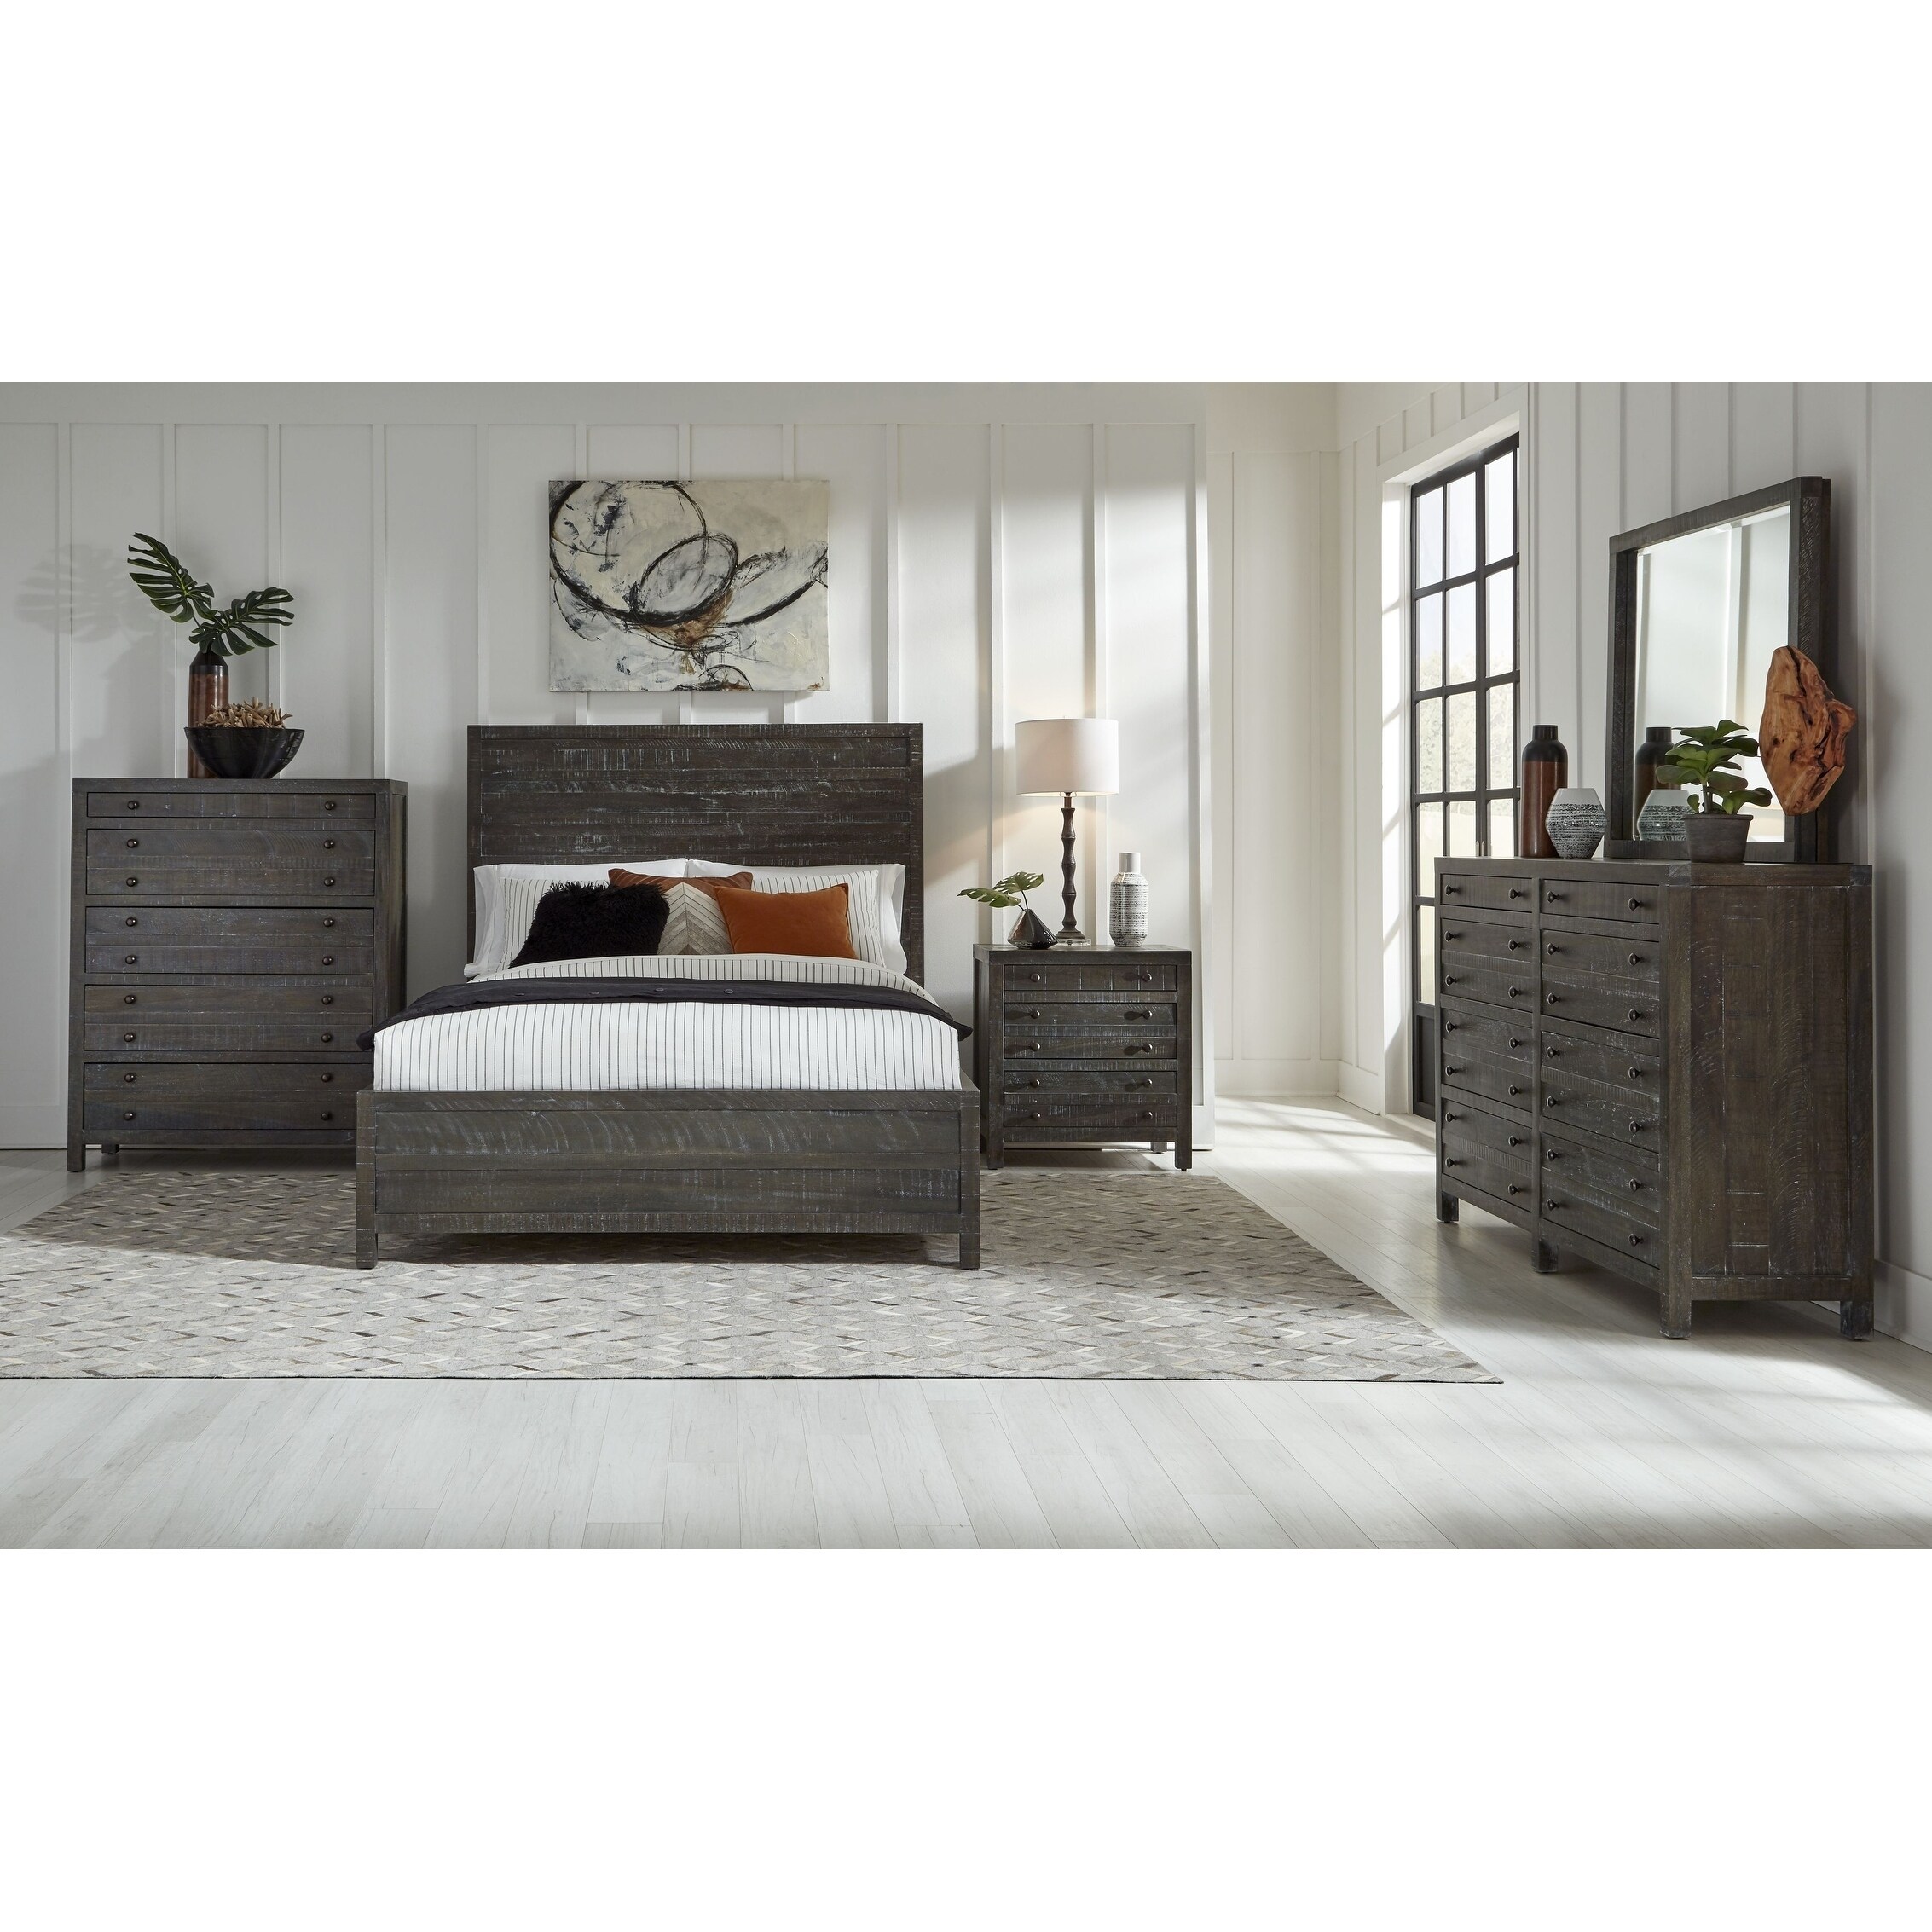 Townsend Solid Wood Three Drawer Nighstand in Gunmetal - image 3 of 5